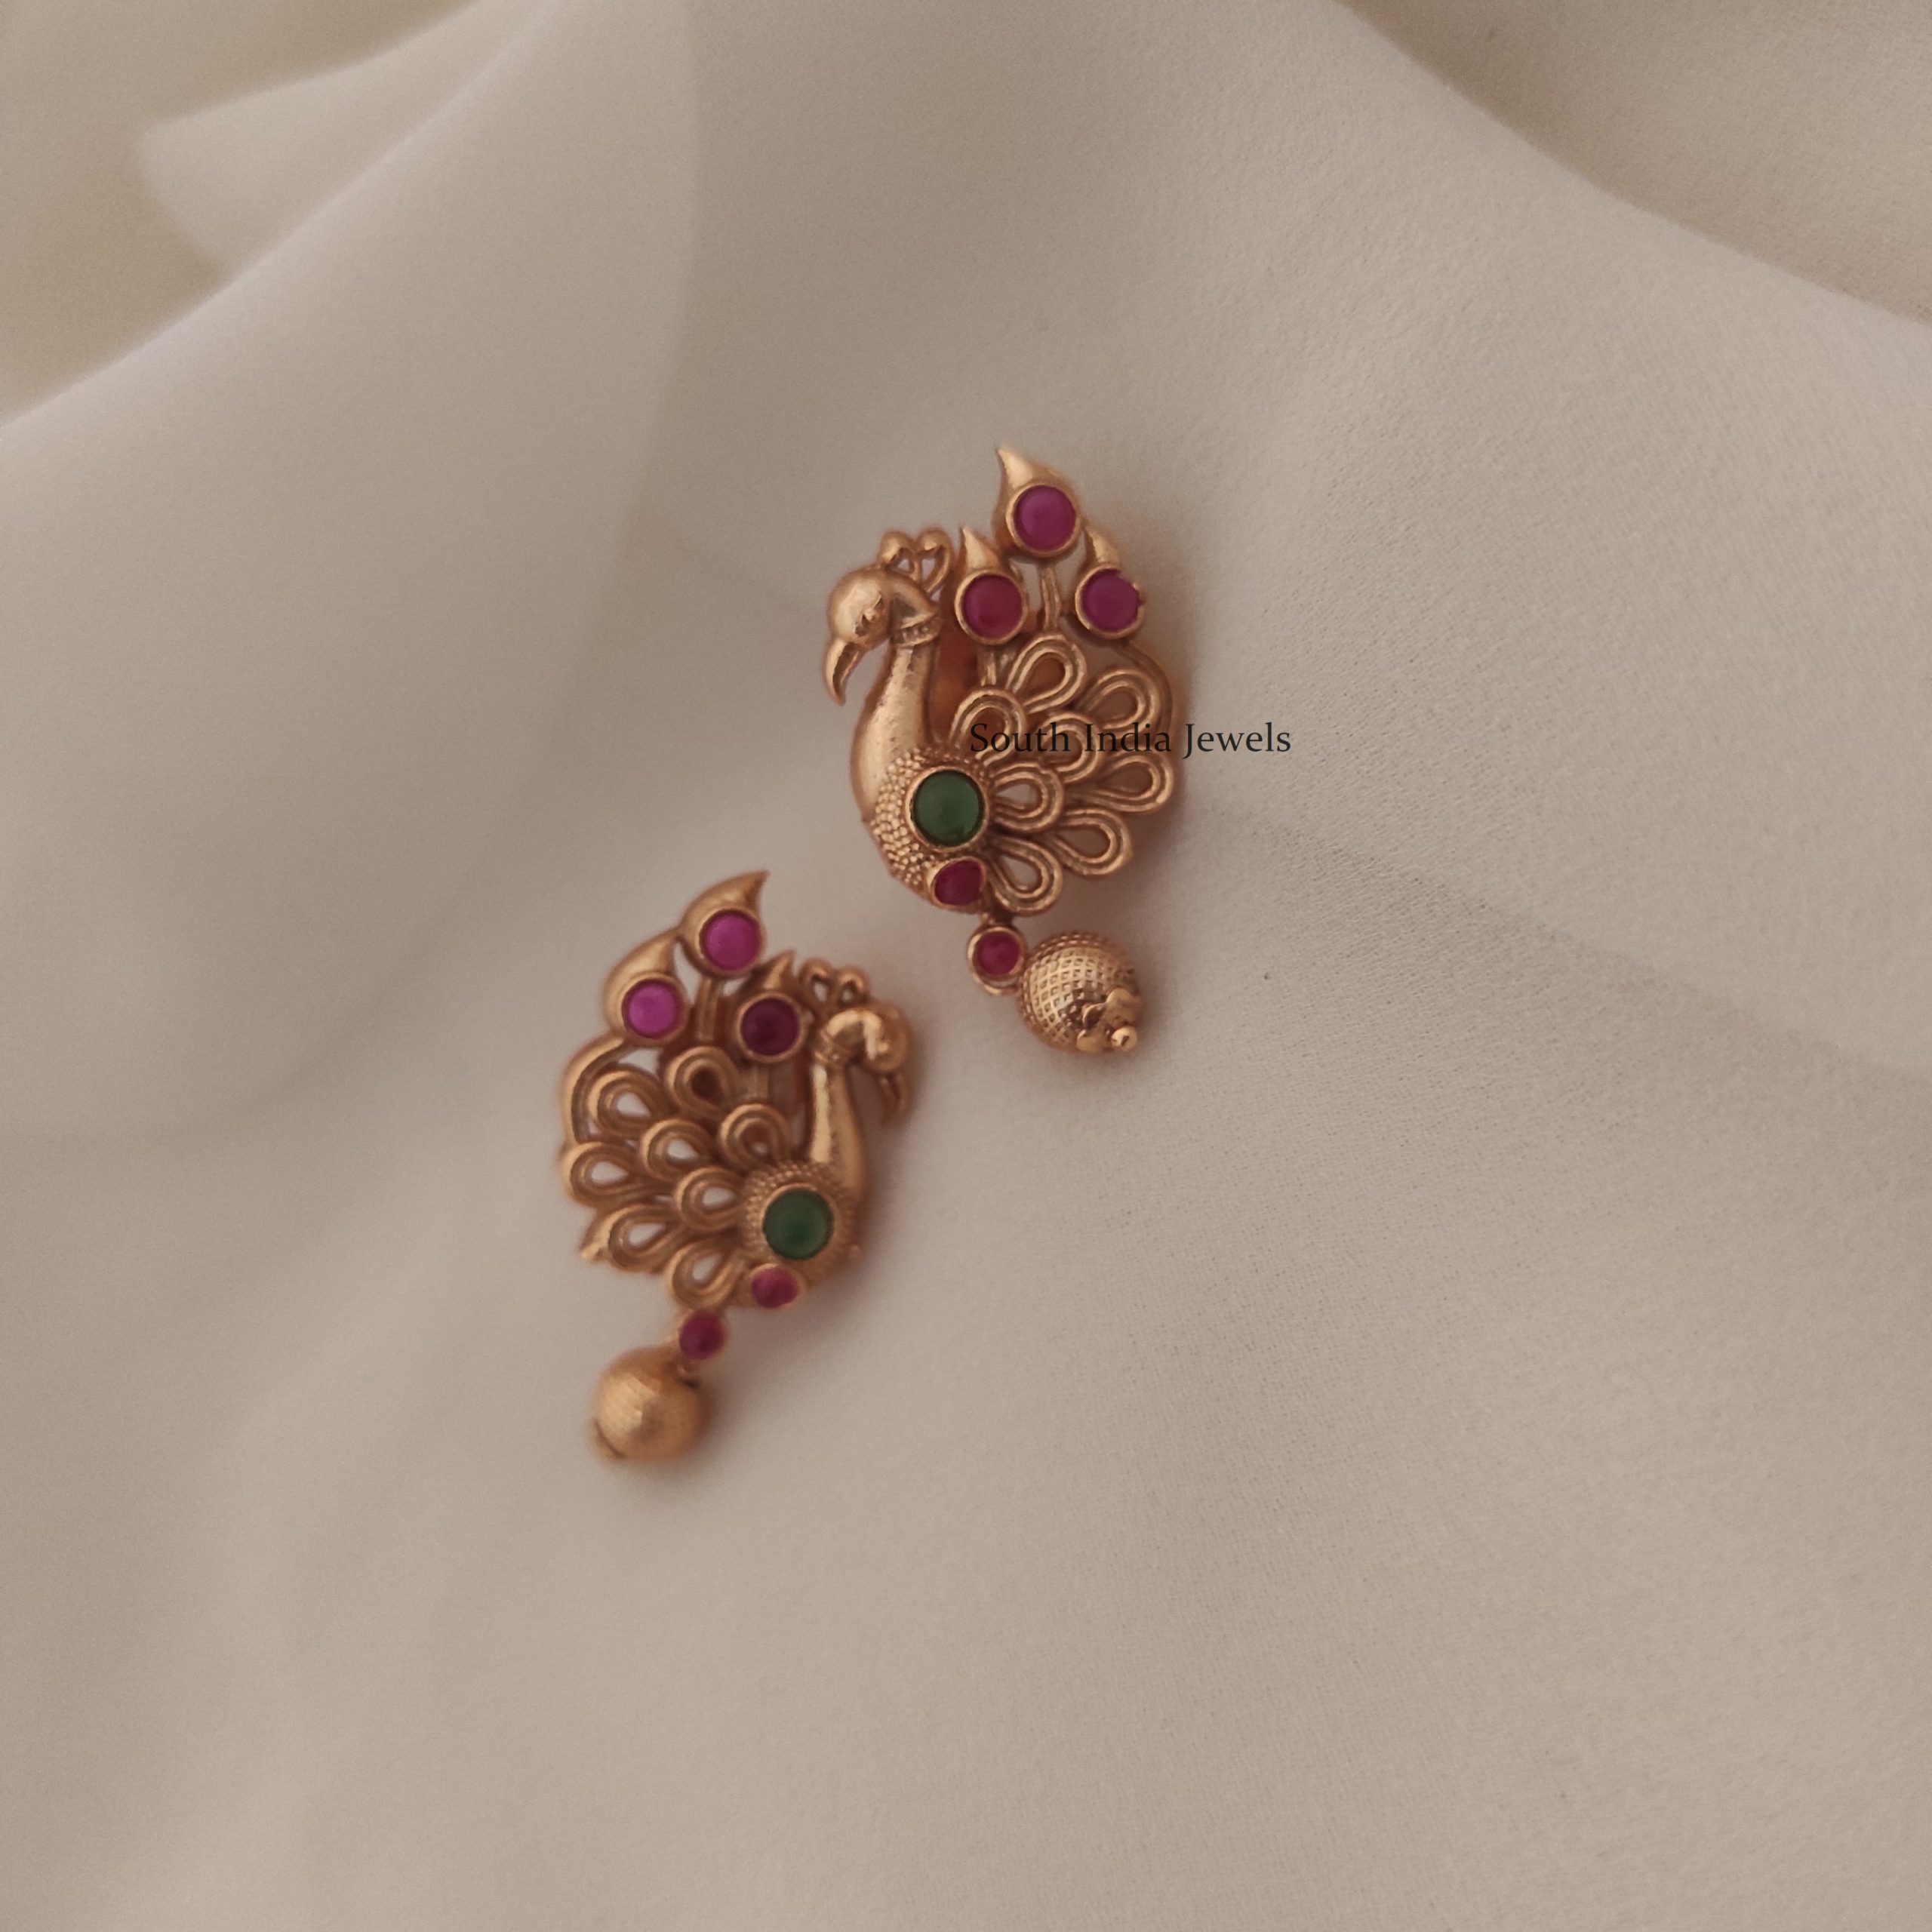 Source Chinas import small gold earrings beautiful perforation earrings  on malibabacom